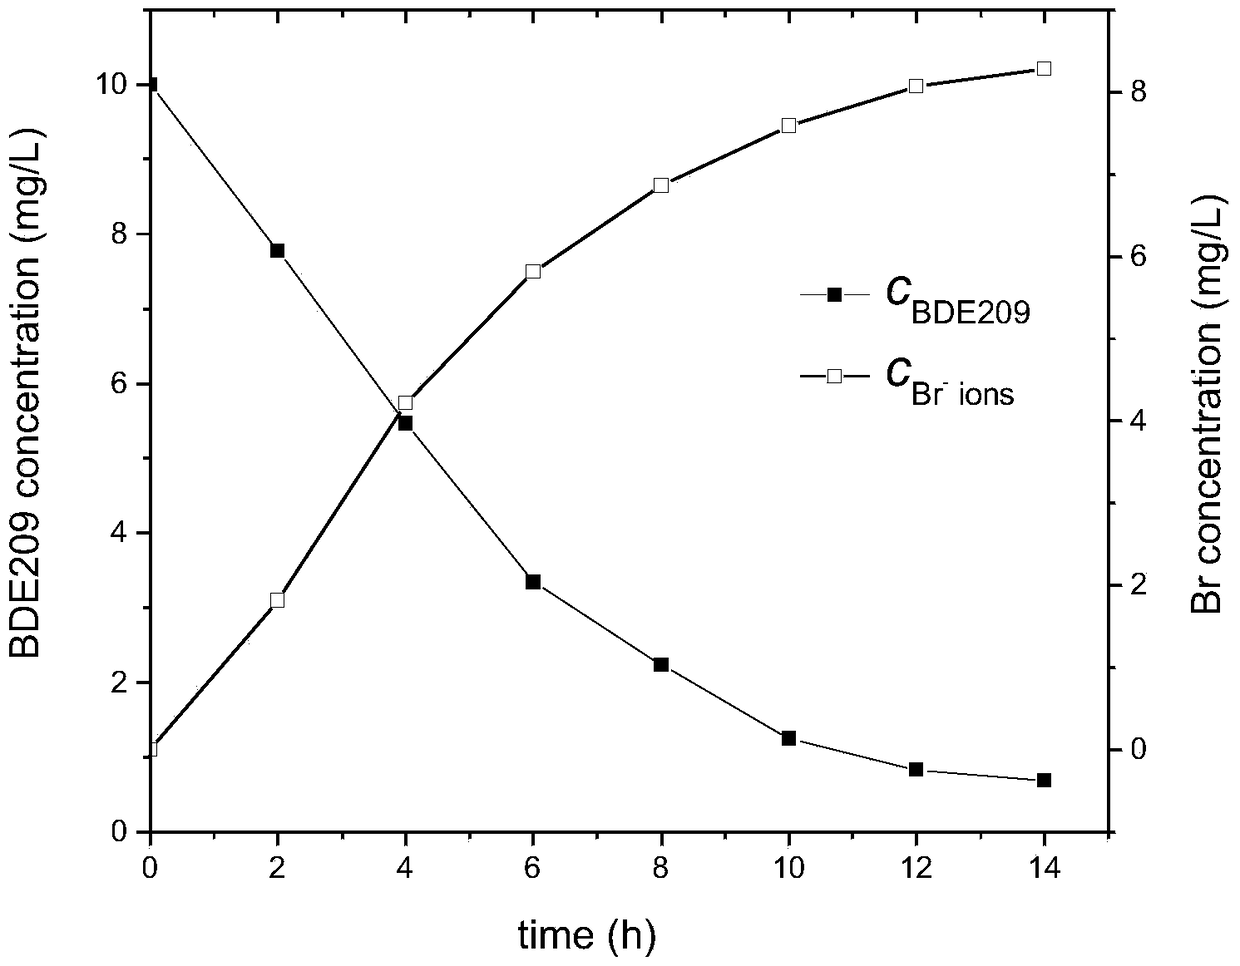 Homogeneous Catalytic Process for Degradation of Organic Pollutant Decabromodiphenyl Ether Using Keggin Type Heteropoly Compound H3PW12O40 as Catalyst